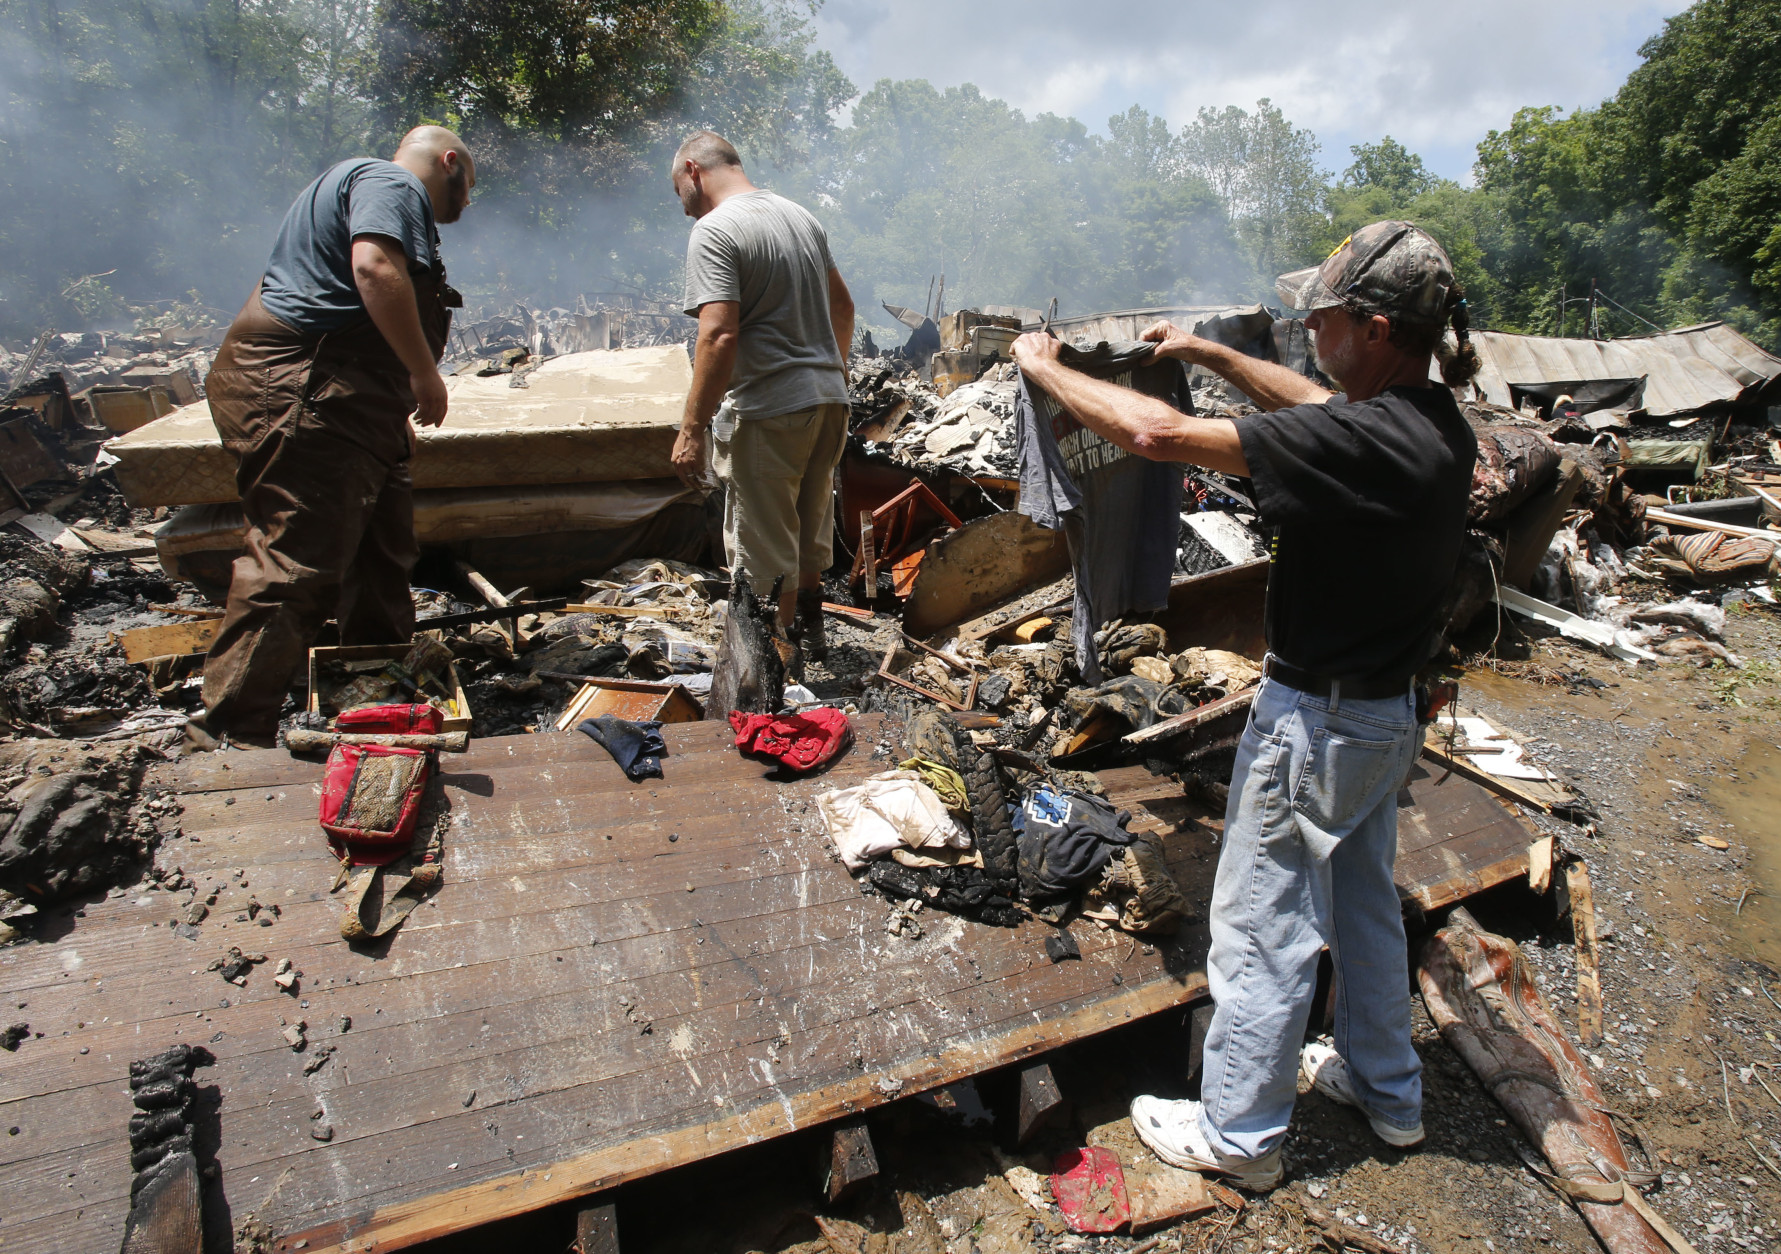 Ron Scott, right, recovers a shirt from the burned remnants of his home that was swept off it's foundation and burned after from severe flooding hit in White Sulphur Springs, W. Va., Friday, June 24, 2016. A deluge of 9 inches of rain on parts of West Virginia destroyed or damaged more than 100 homes and knocked out power to tens of thousands of homes and businesses. (AP Photo/Steve Helber)